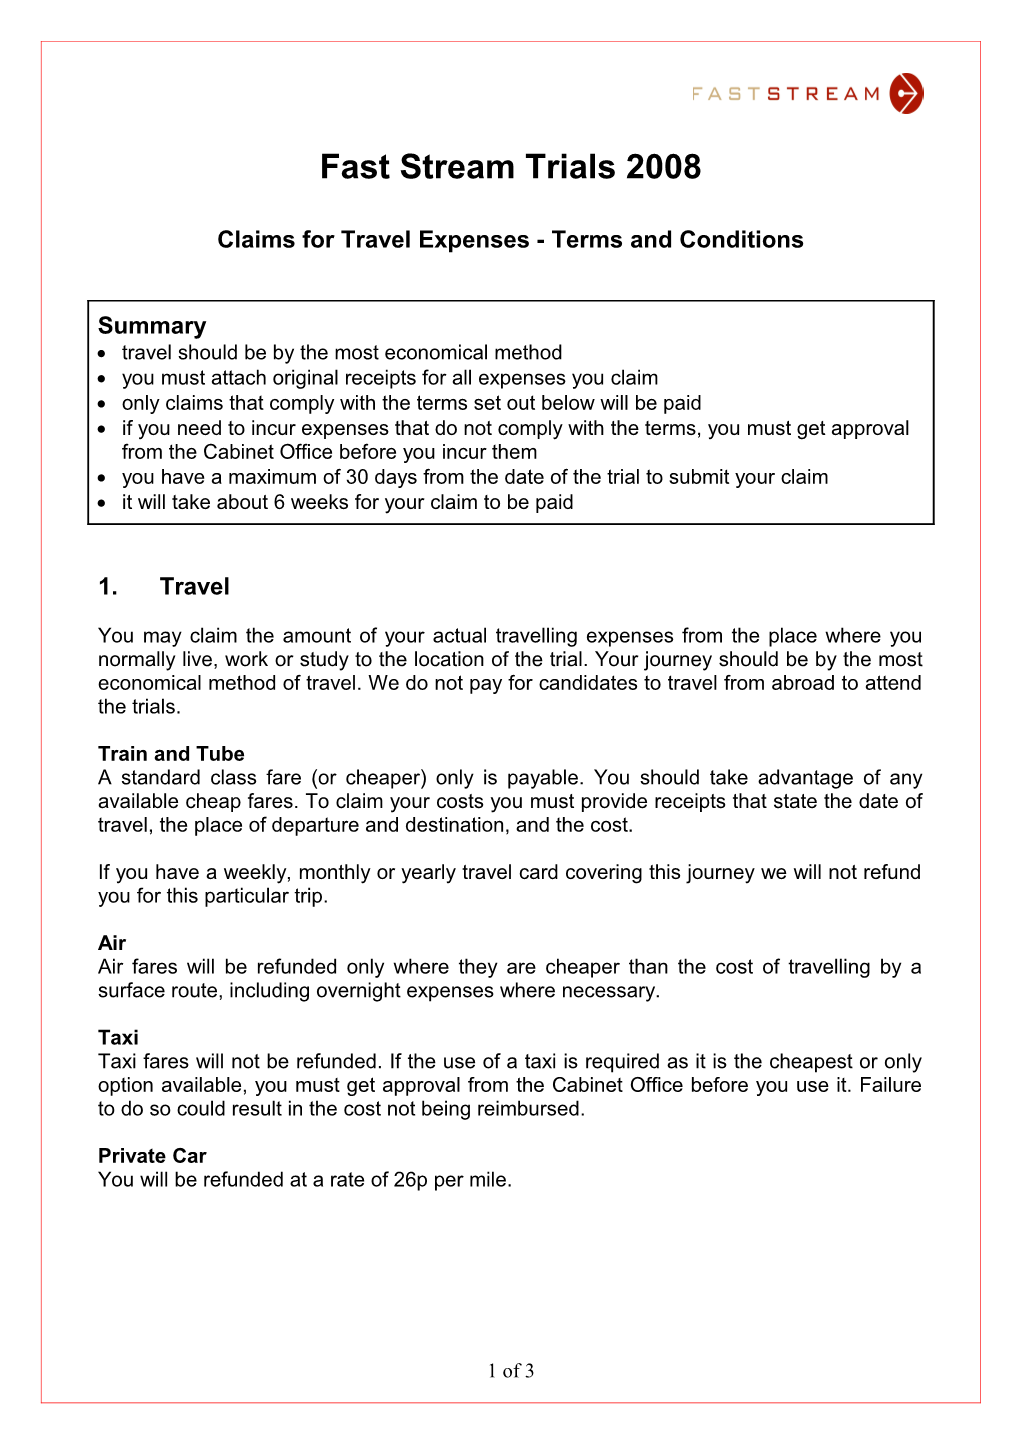 Claims for Travel Expenses